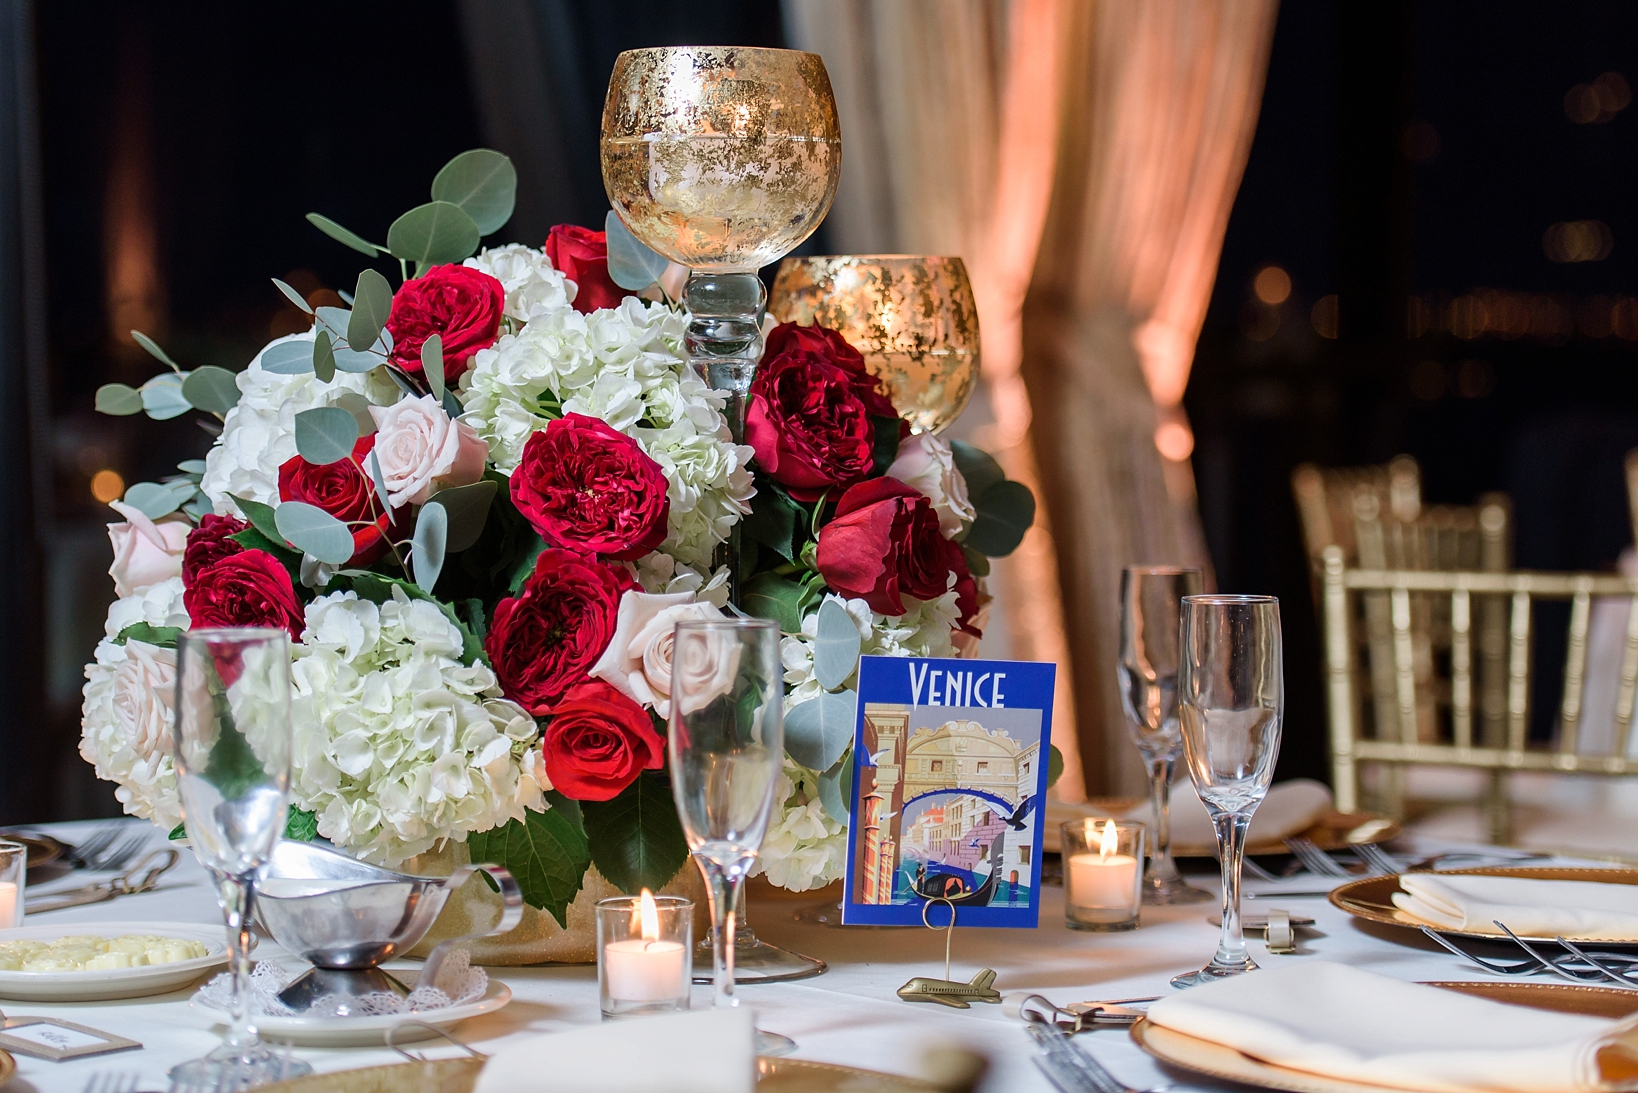 Wedding reception details including floral centerpieces and travel themed table numbers